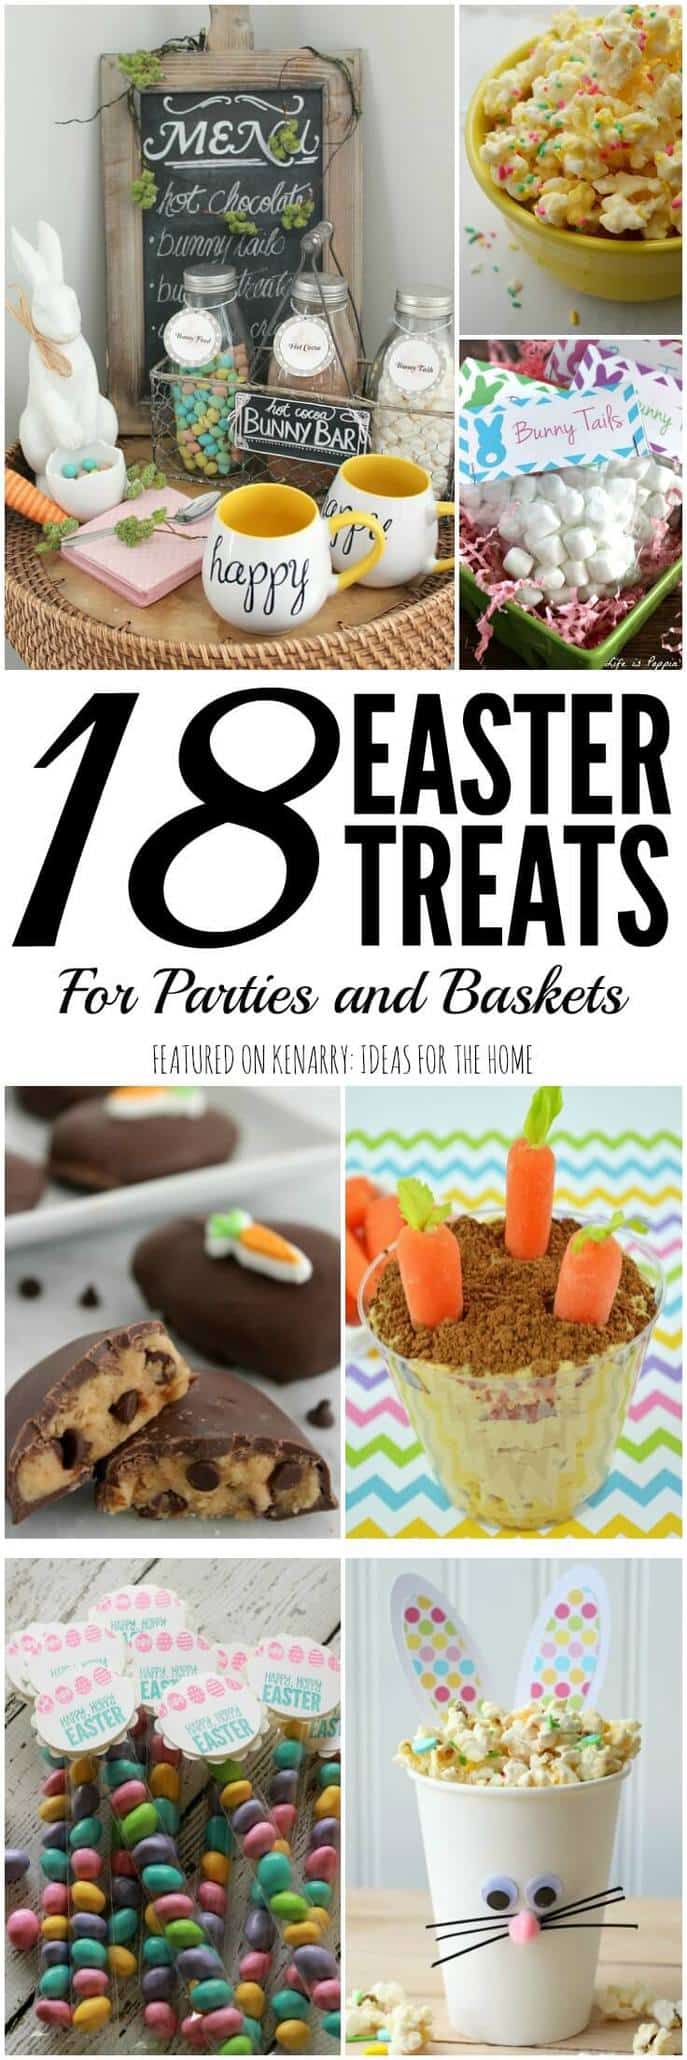 Get inspired for your upcoming Easter festivities! Check out these 18 fun ideas for Easter Treats that would be perfect for a party or kids' Easter baskets.